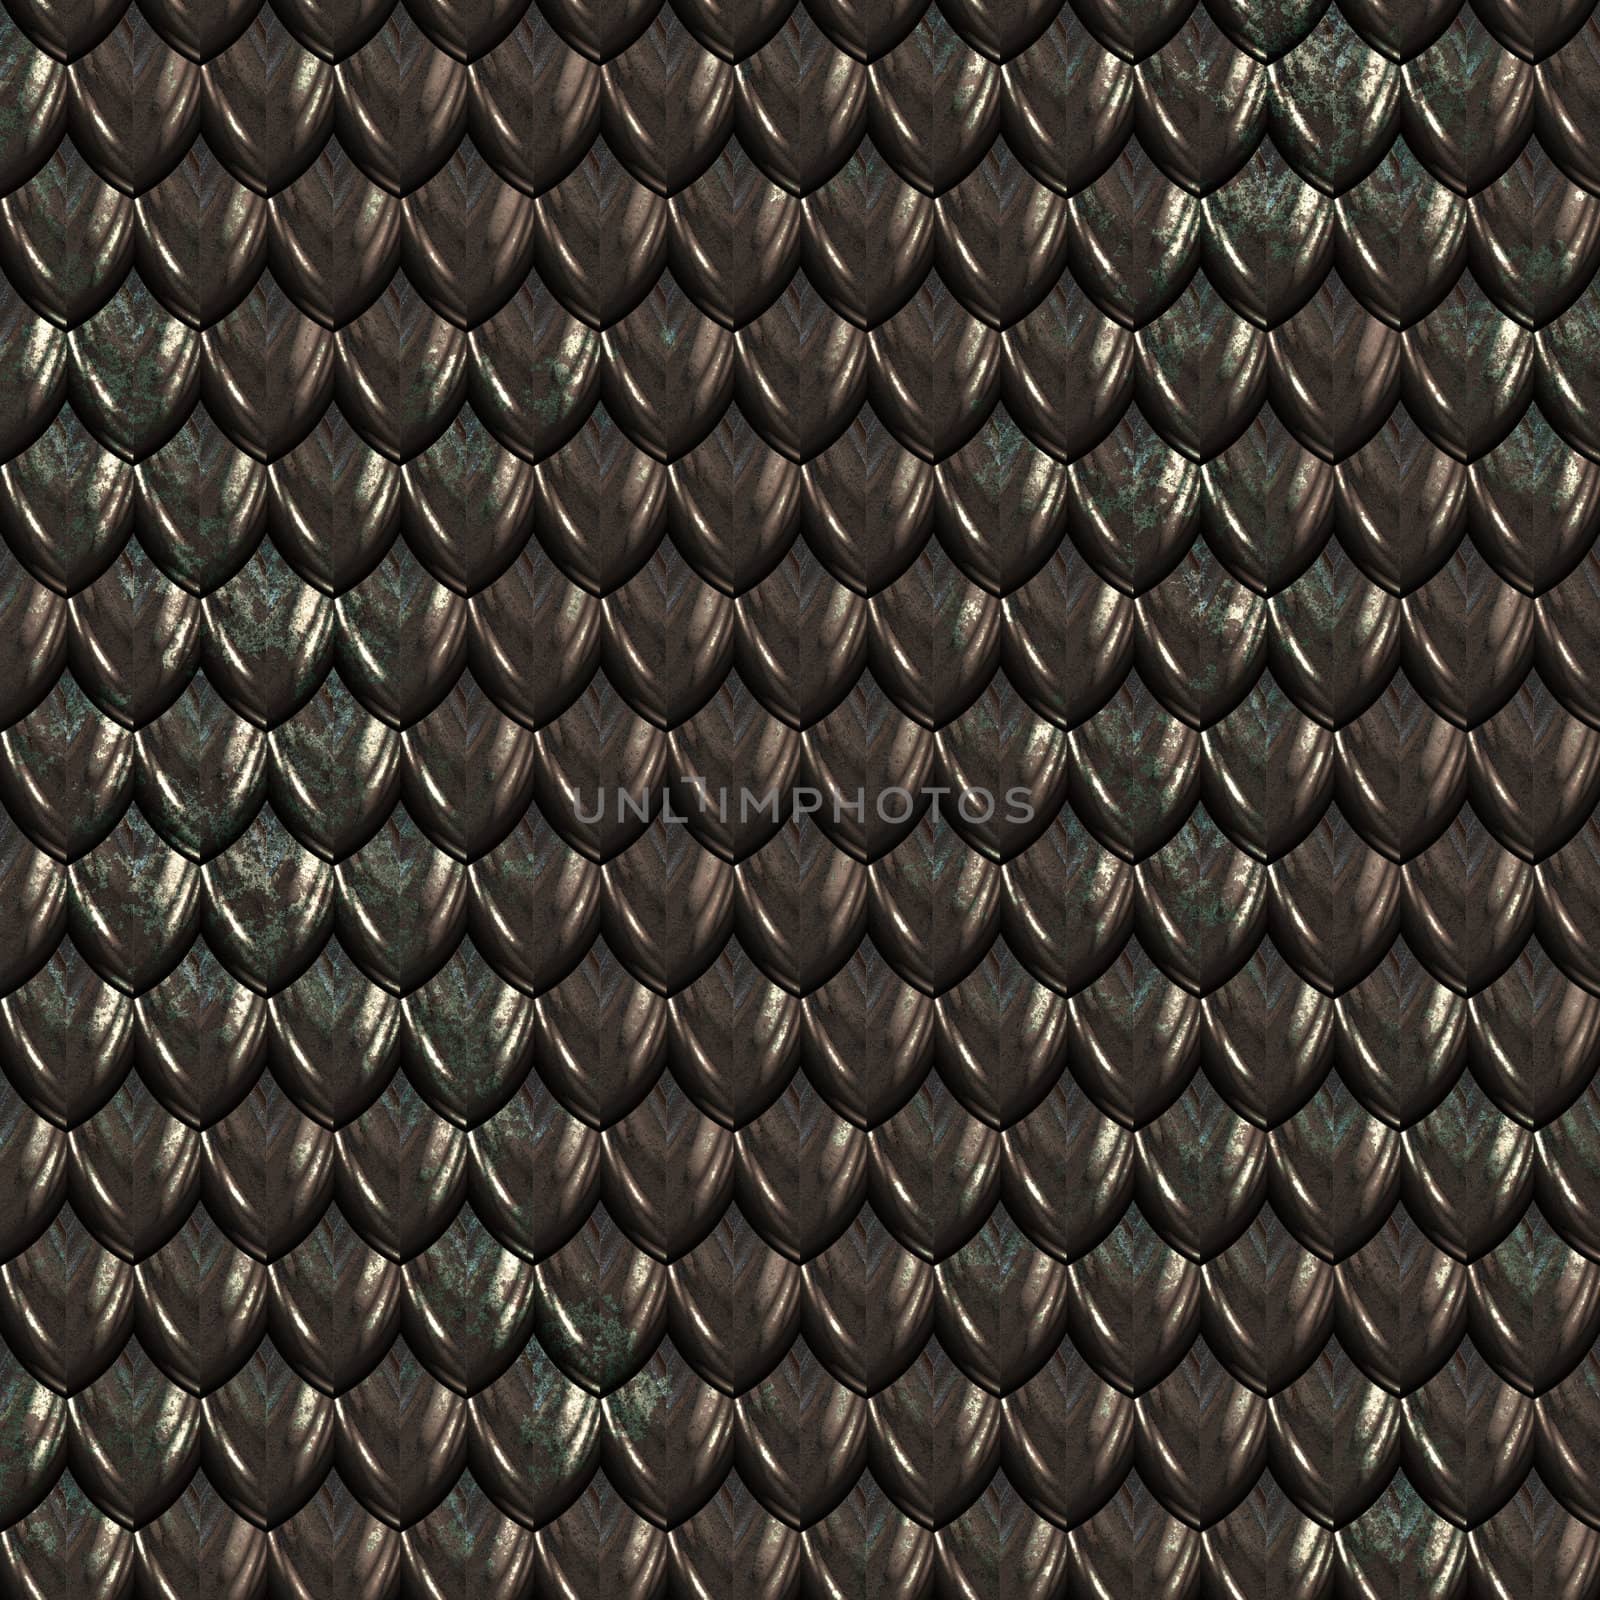 a large image of black shiny dragon scales or hide